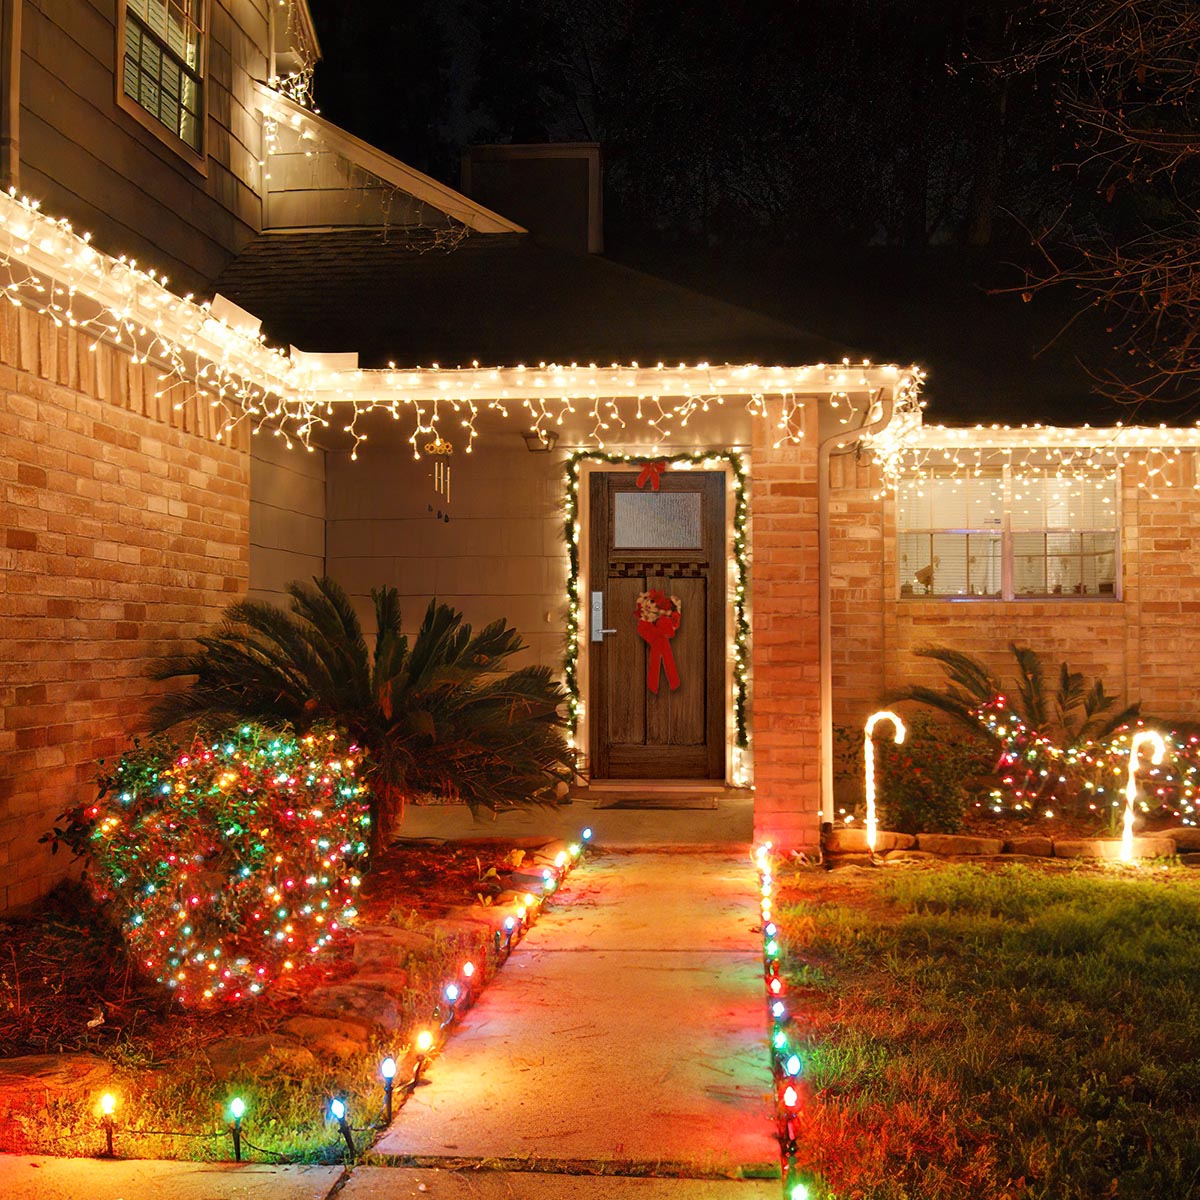 How To Decorate Your Exterior To Boost Your Holiday Curb Appeal - Knockety